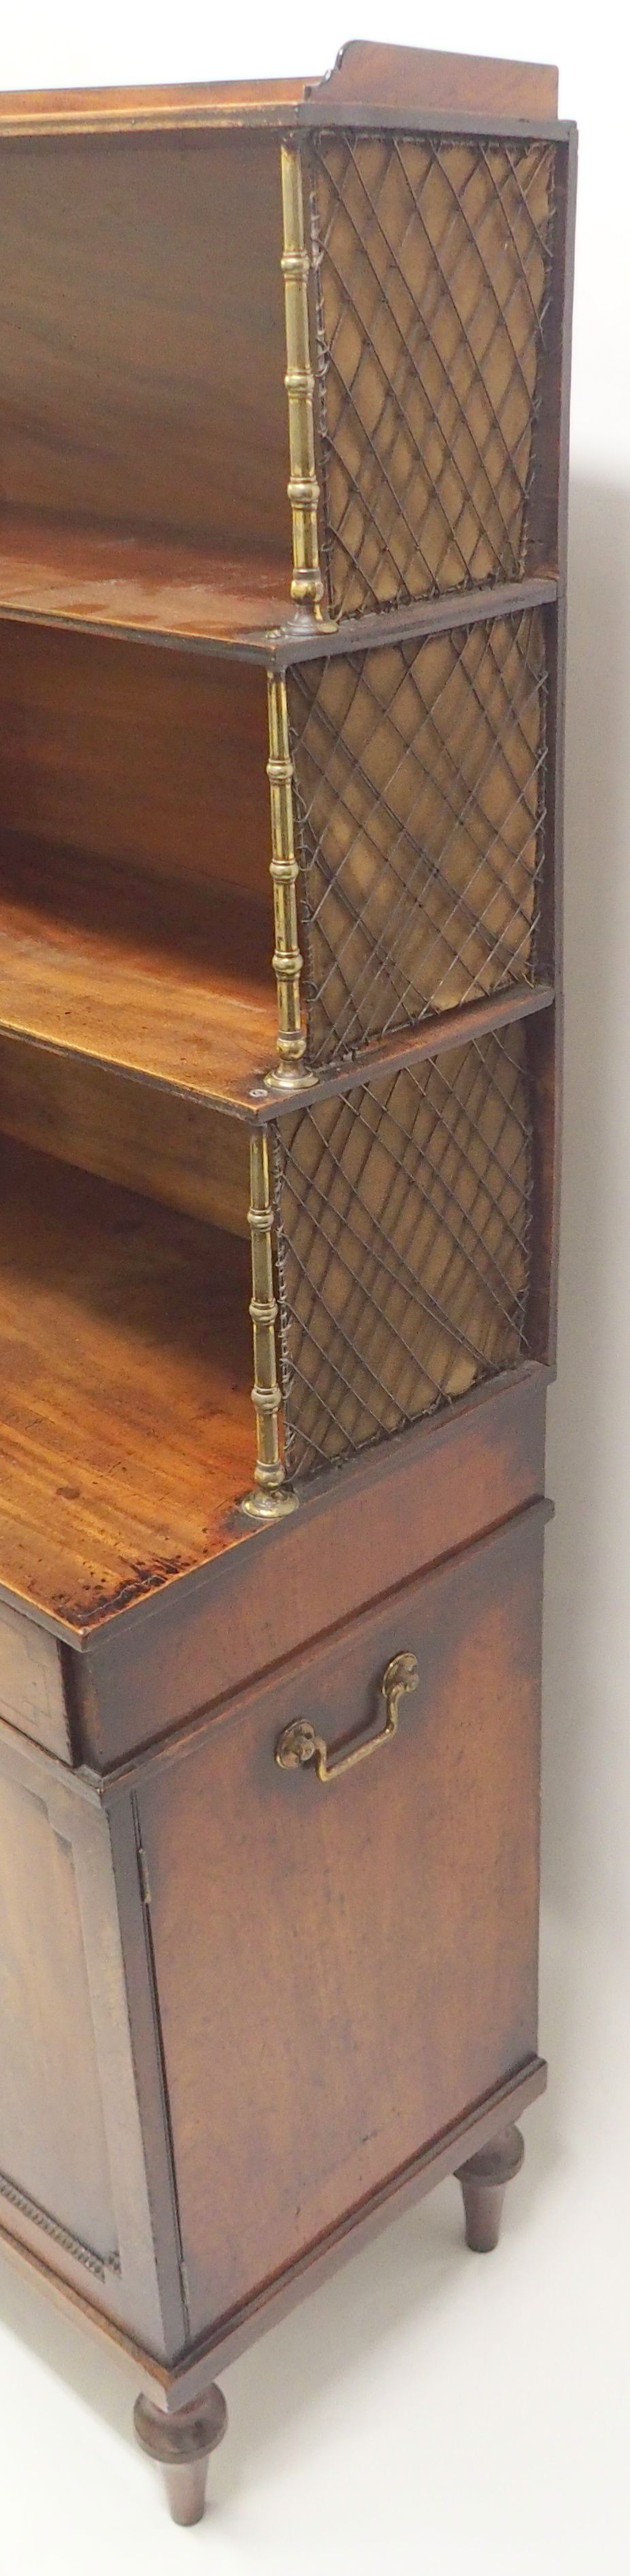 A REGENCY MAHOGANY CAMPAIGN SECRETAIRE BOOKCASE the tiered open shelves joined by brass baluster - Image 4 of 11